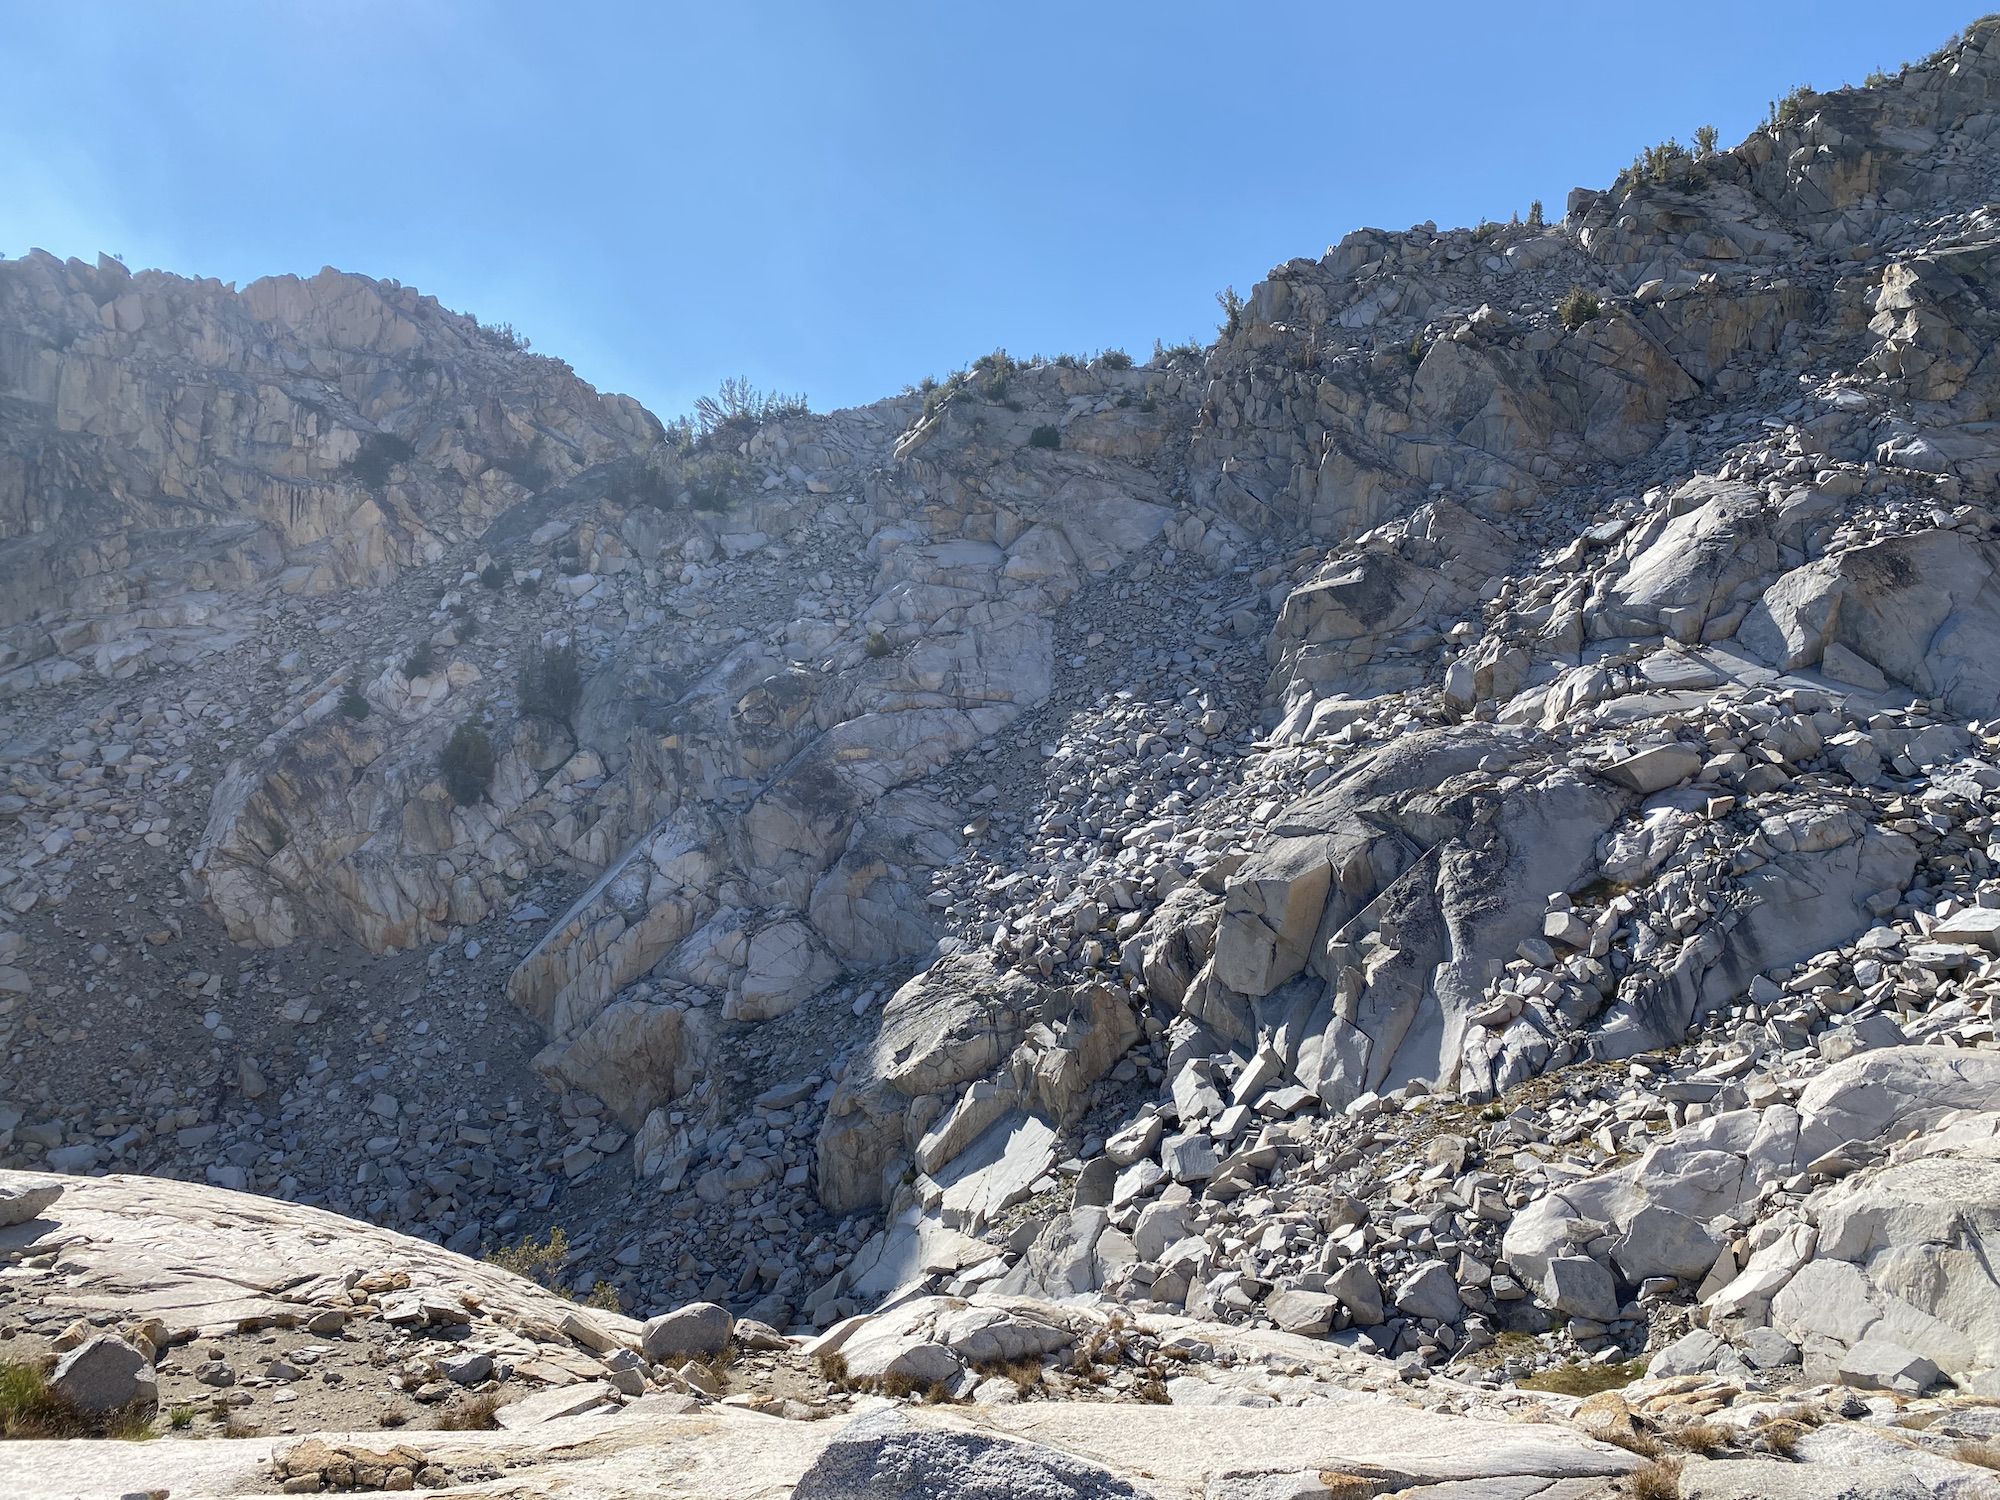 A mountainside consisting of mostly loose rocks.